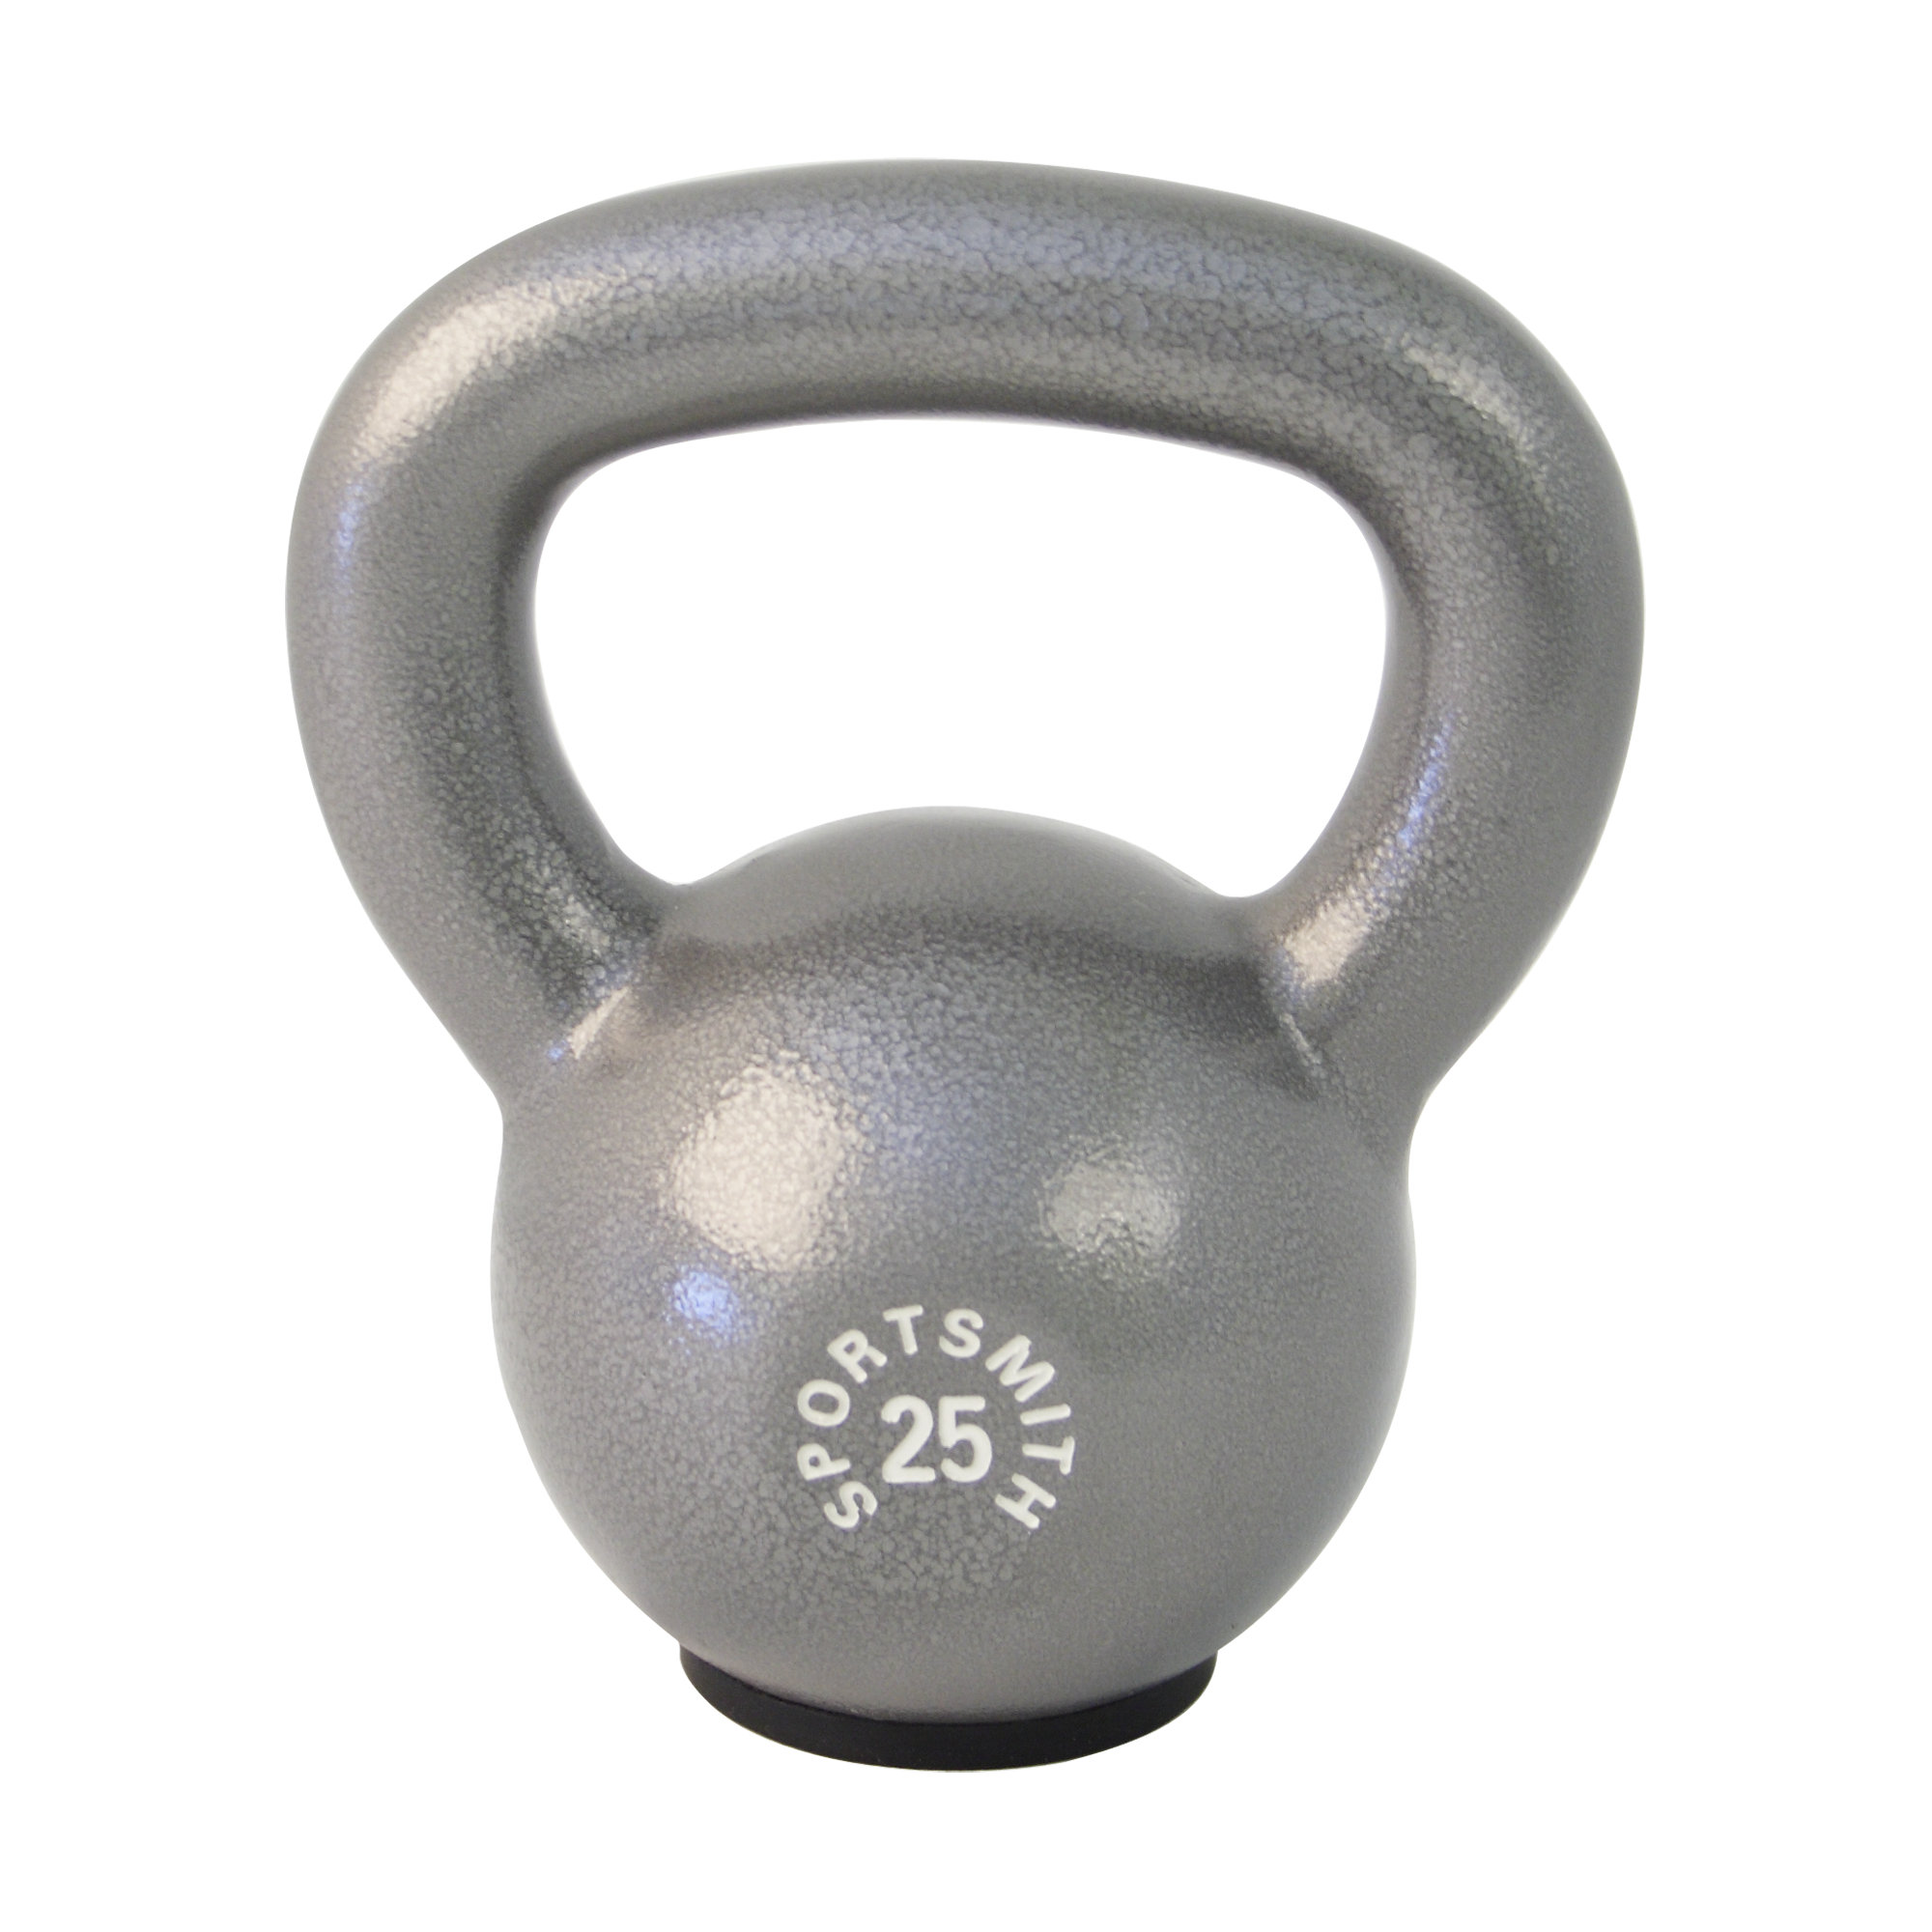 25 Lb. Kettlebell with Rubber Base, Cast Iron, Gray